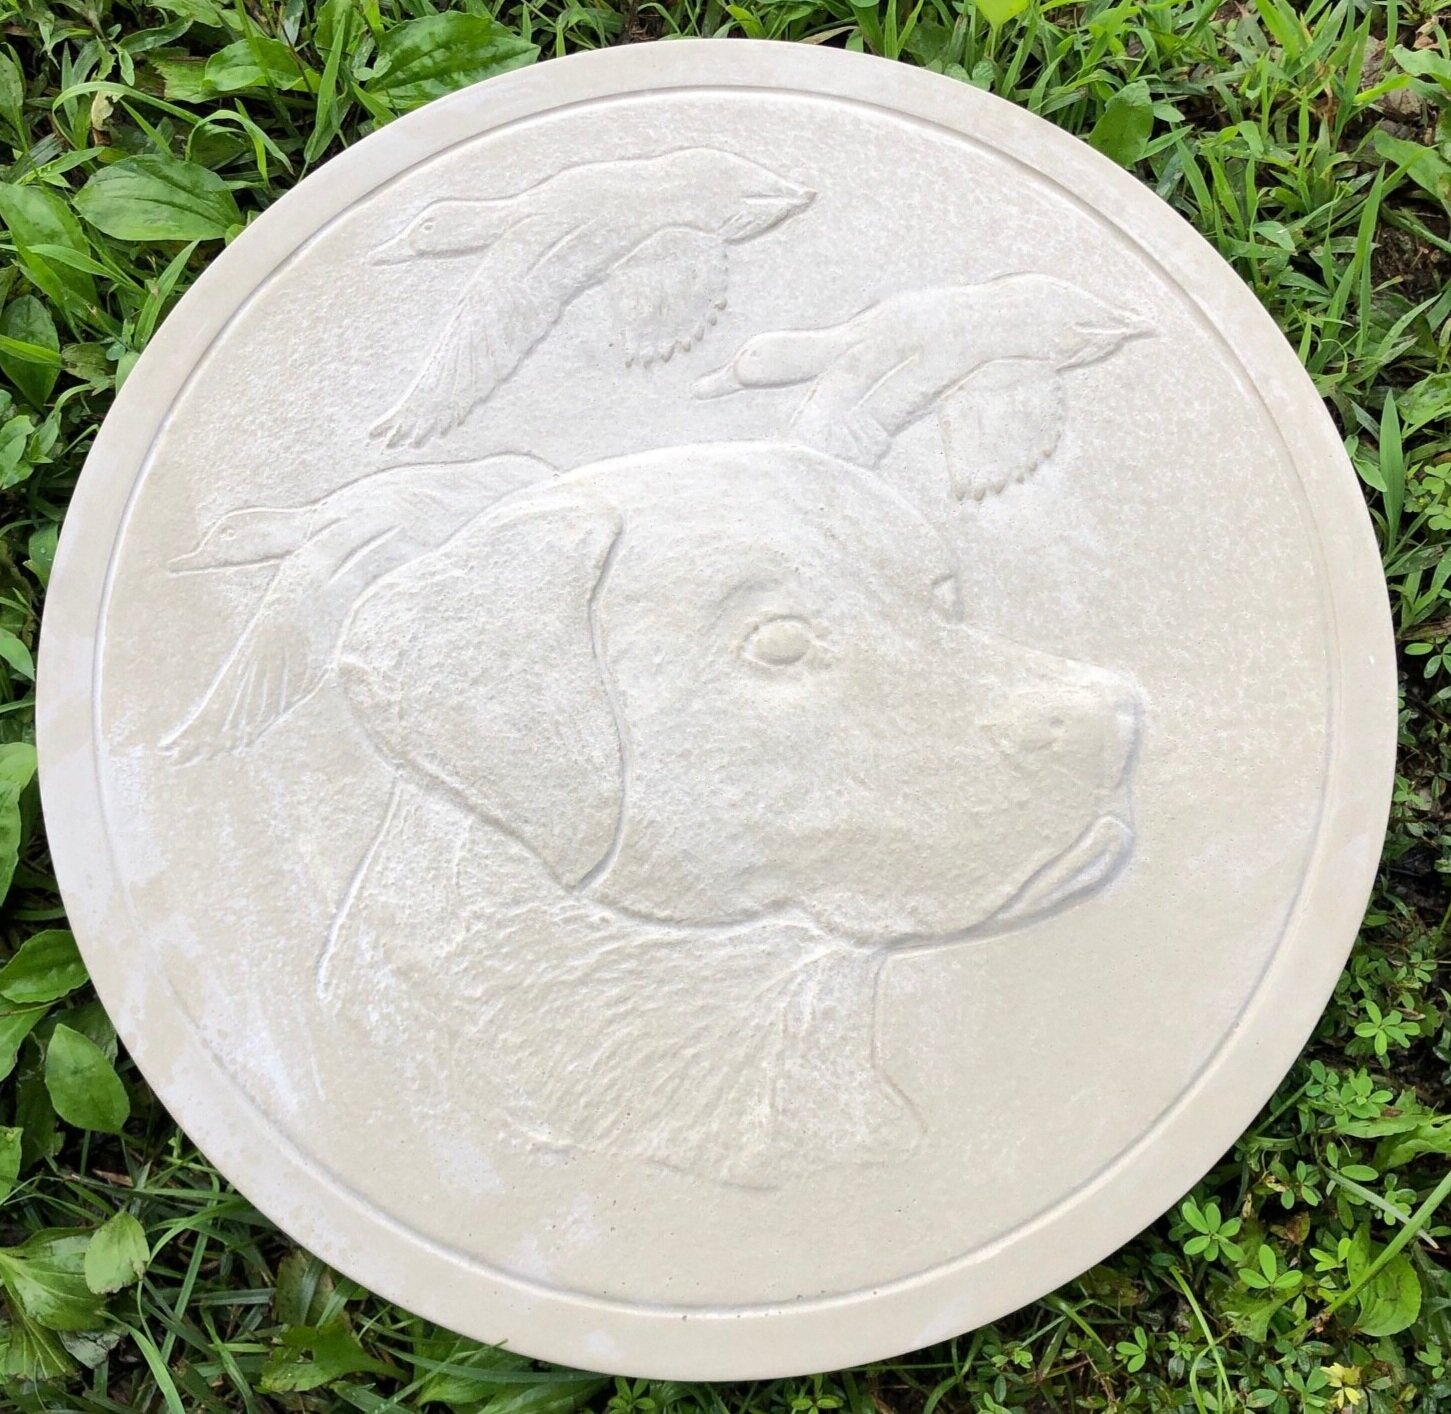 Yorkie Dog Plaster or Concrete Stepping Stone Mold 1273 Moldcreations 